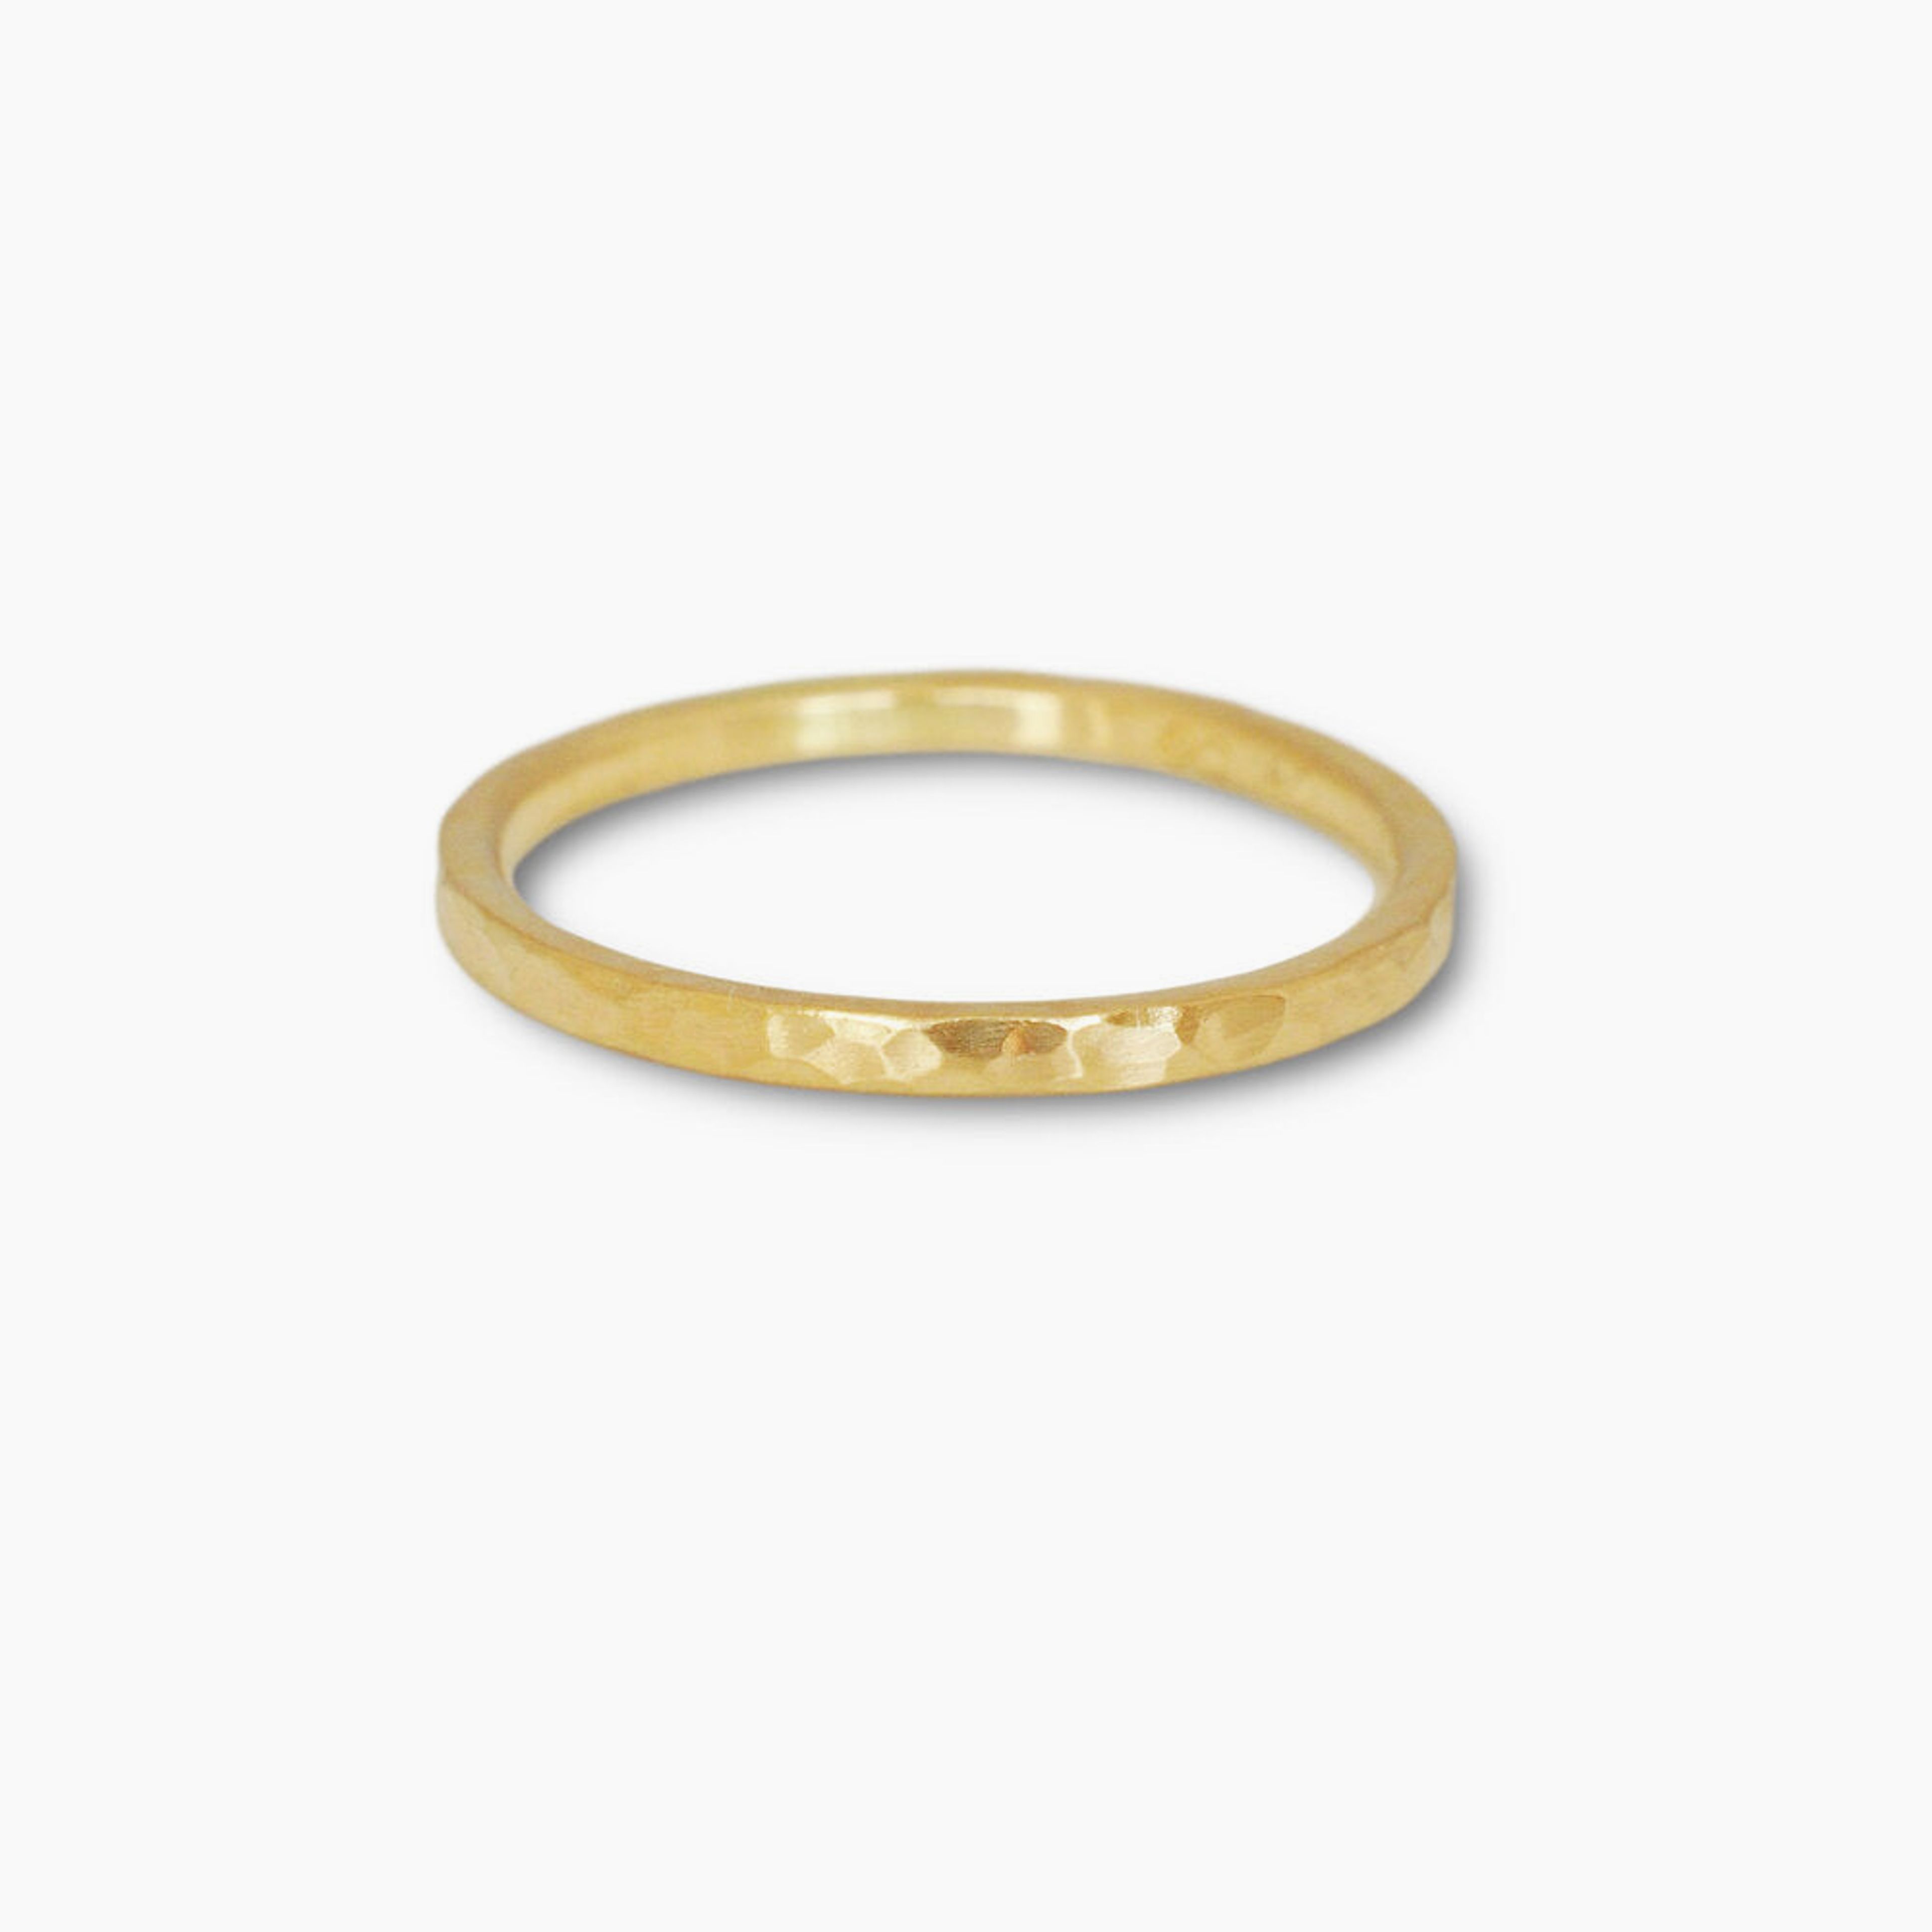 1.5mm Hammered Band in 14k Yellow Gold